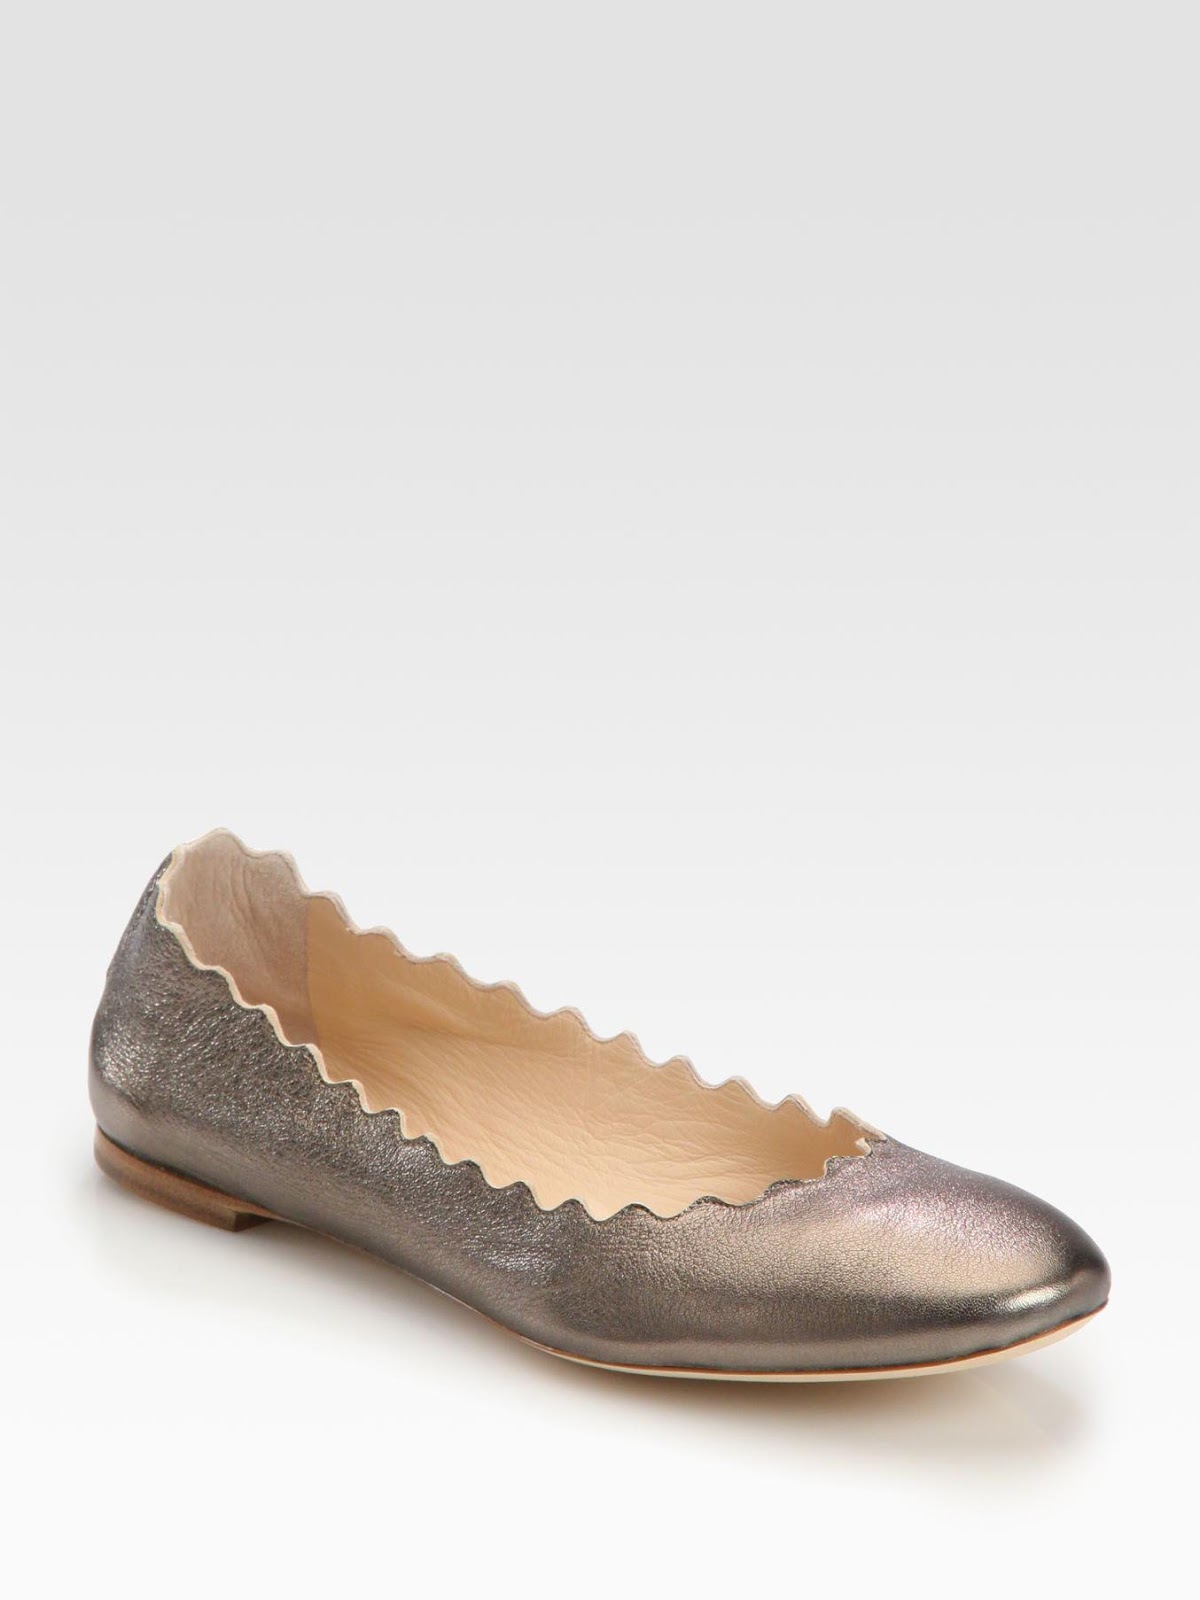 chloe-silver-scalloped-leather-ballet-flats-product-1-14884203-232138778.jpeg